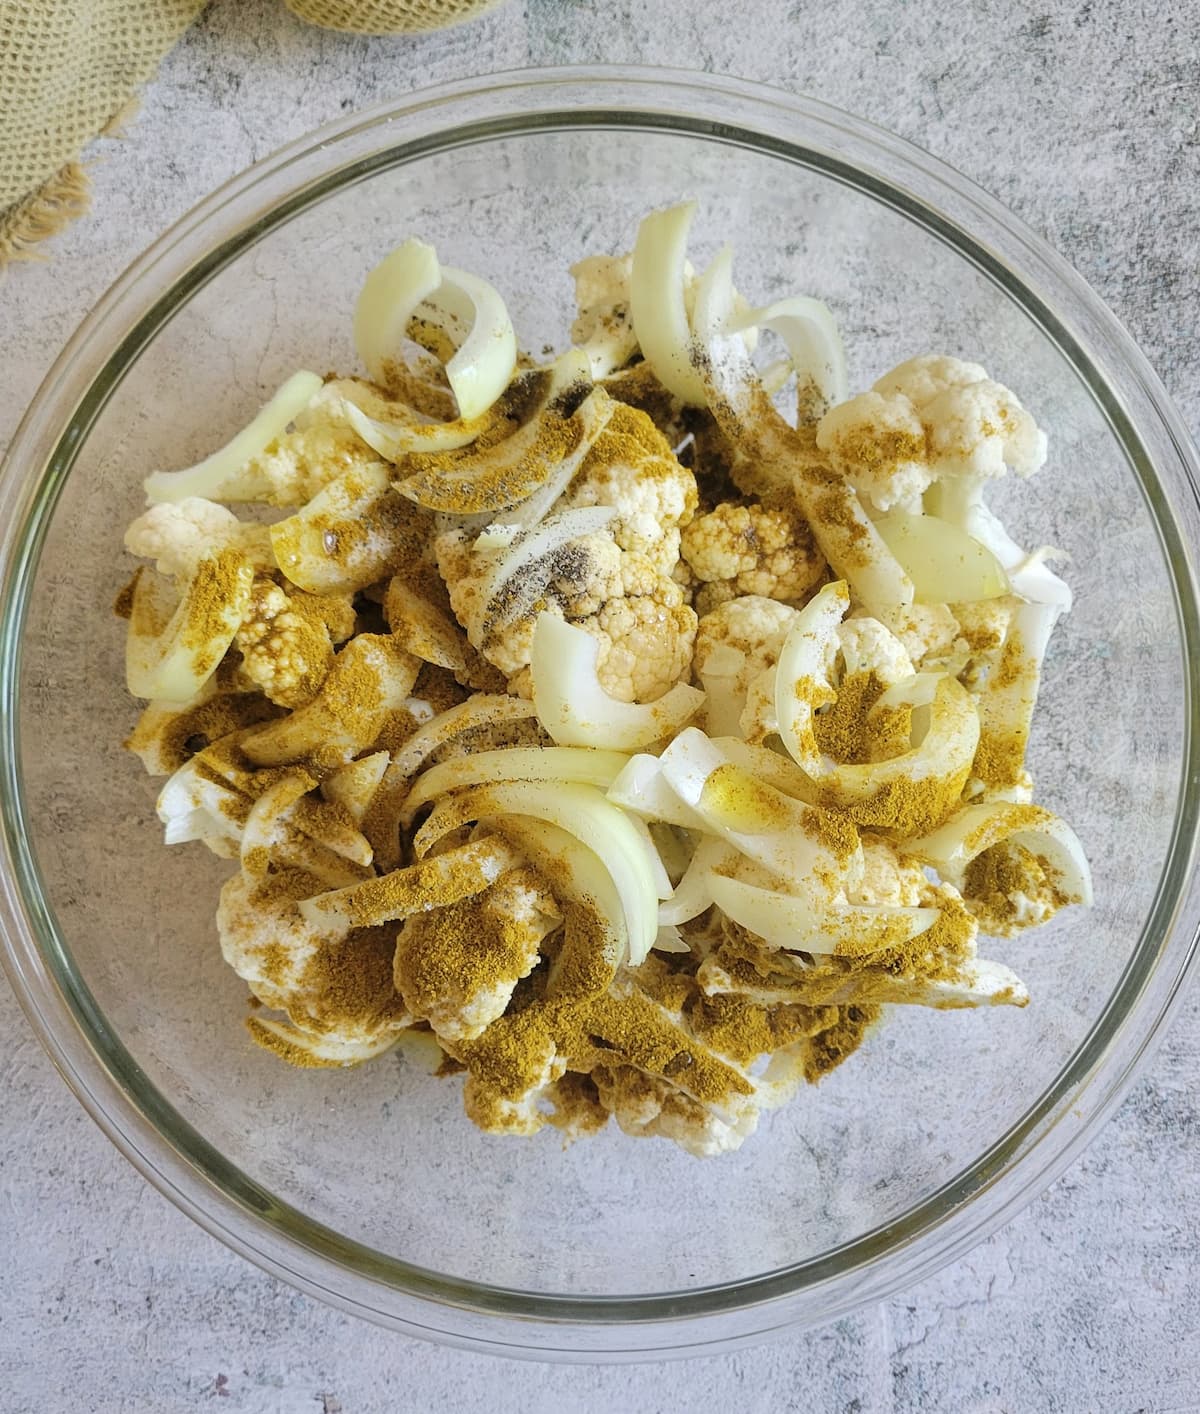 bowl of raw cauliflower florets, sliced white onions and seasonings unmixed